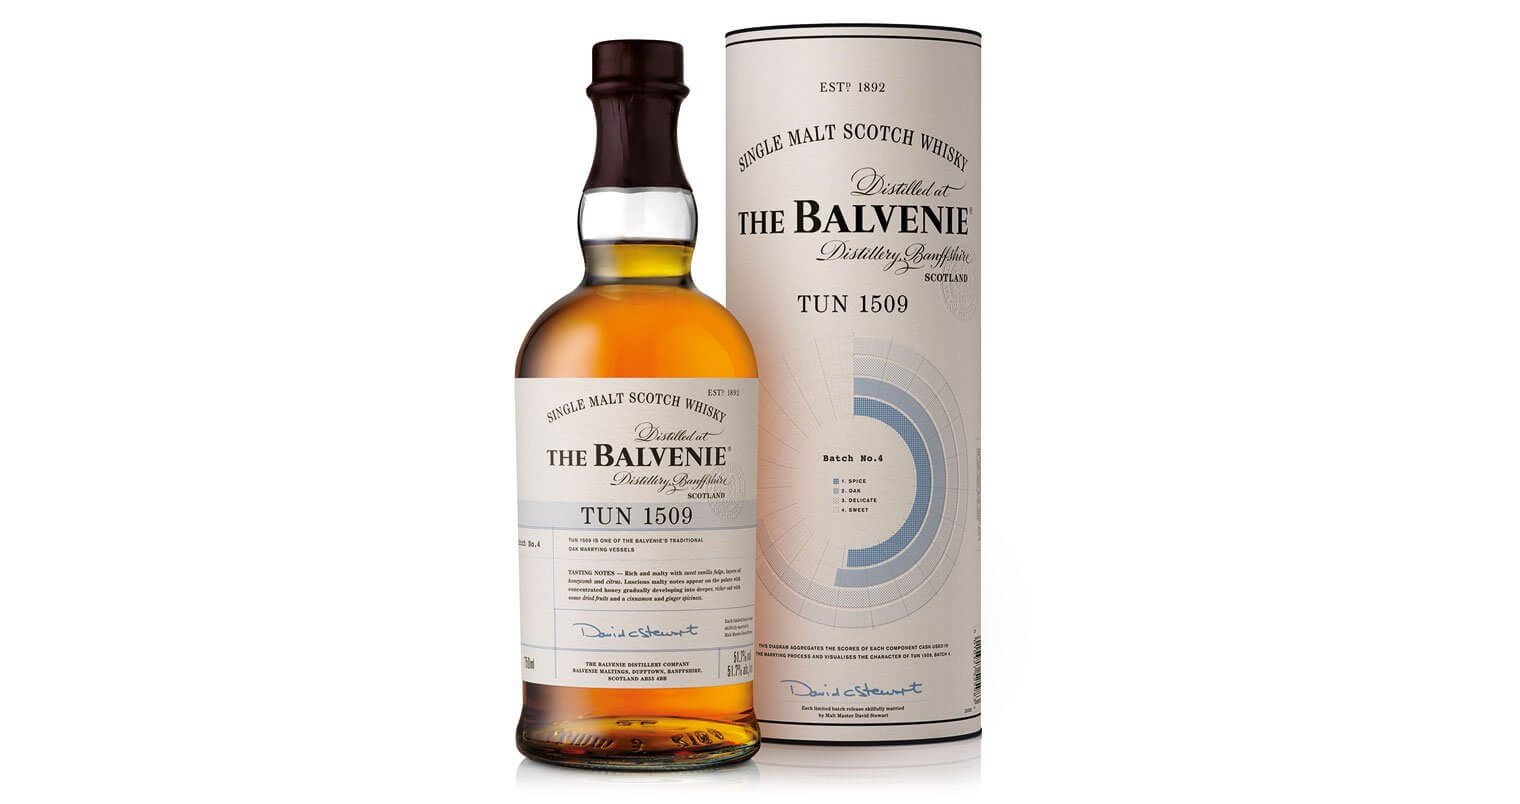 The Balvenie Launches Fourth Bottling in the Tun 1509 Series, featured image